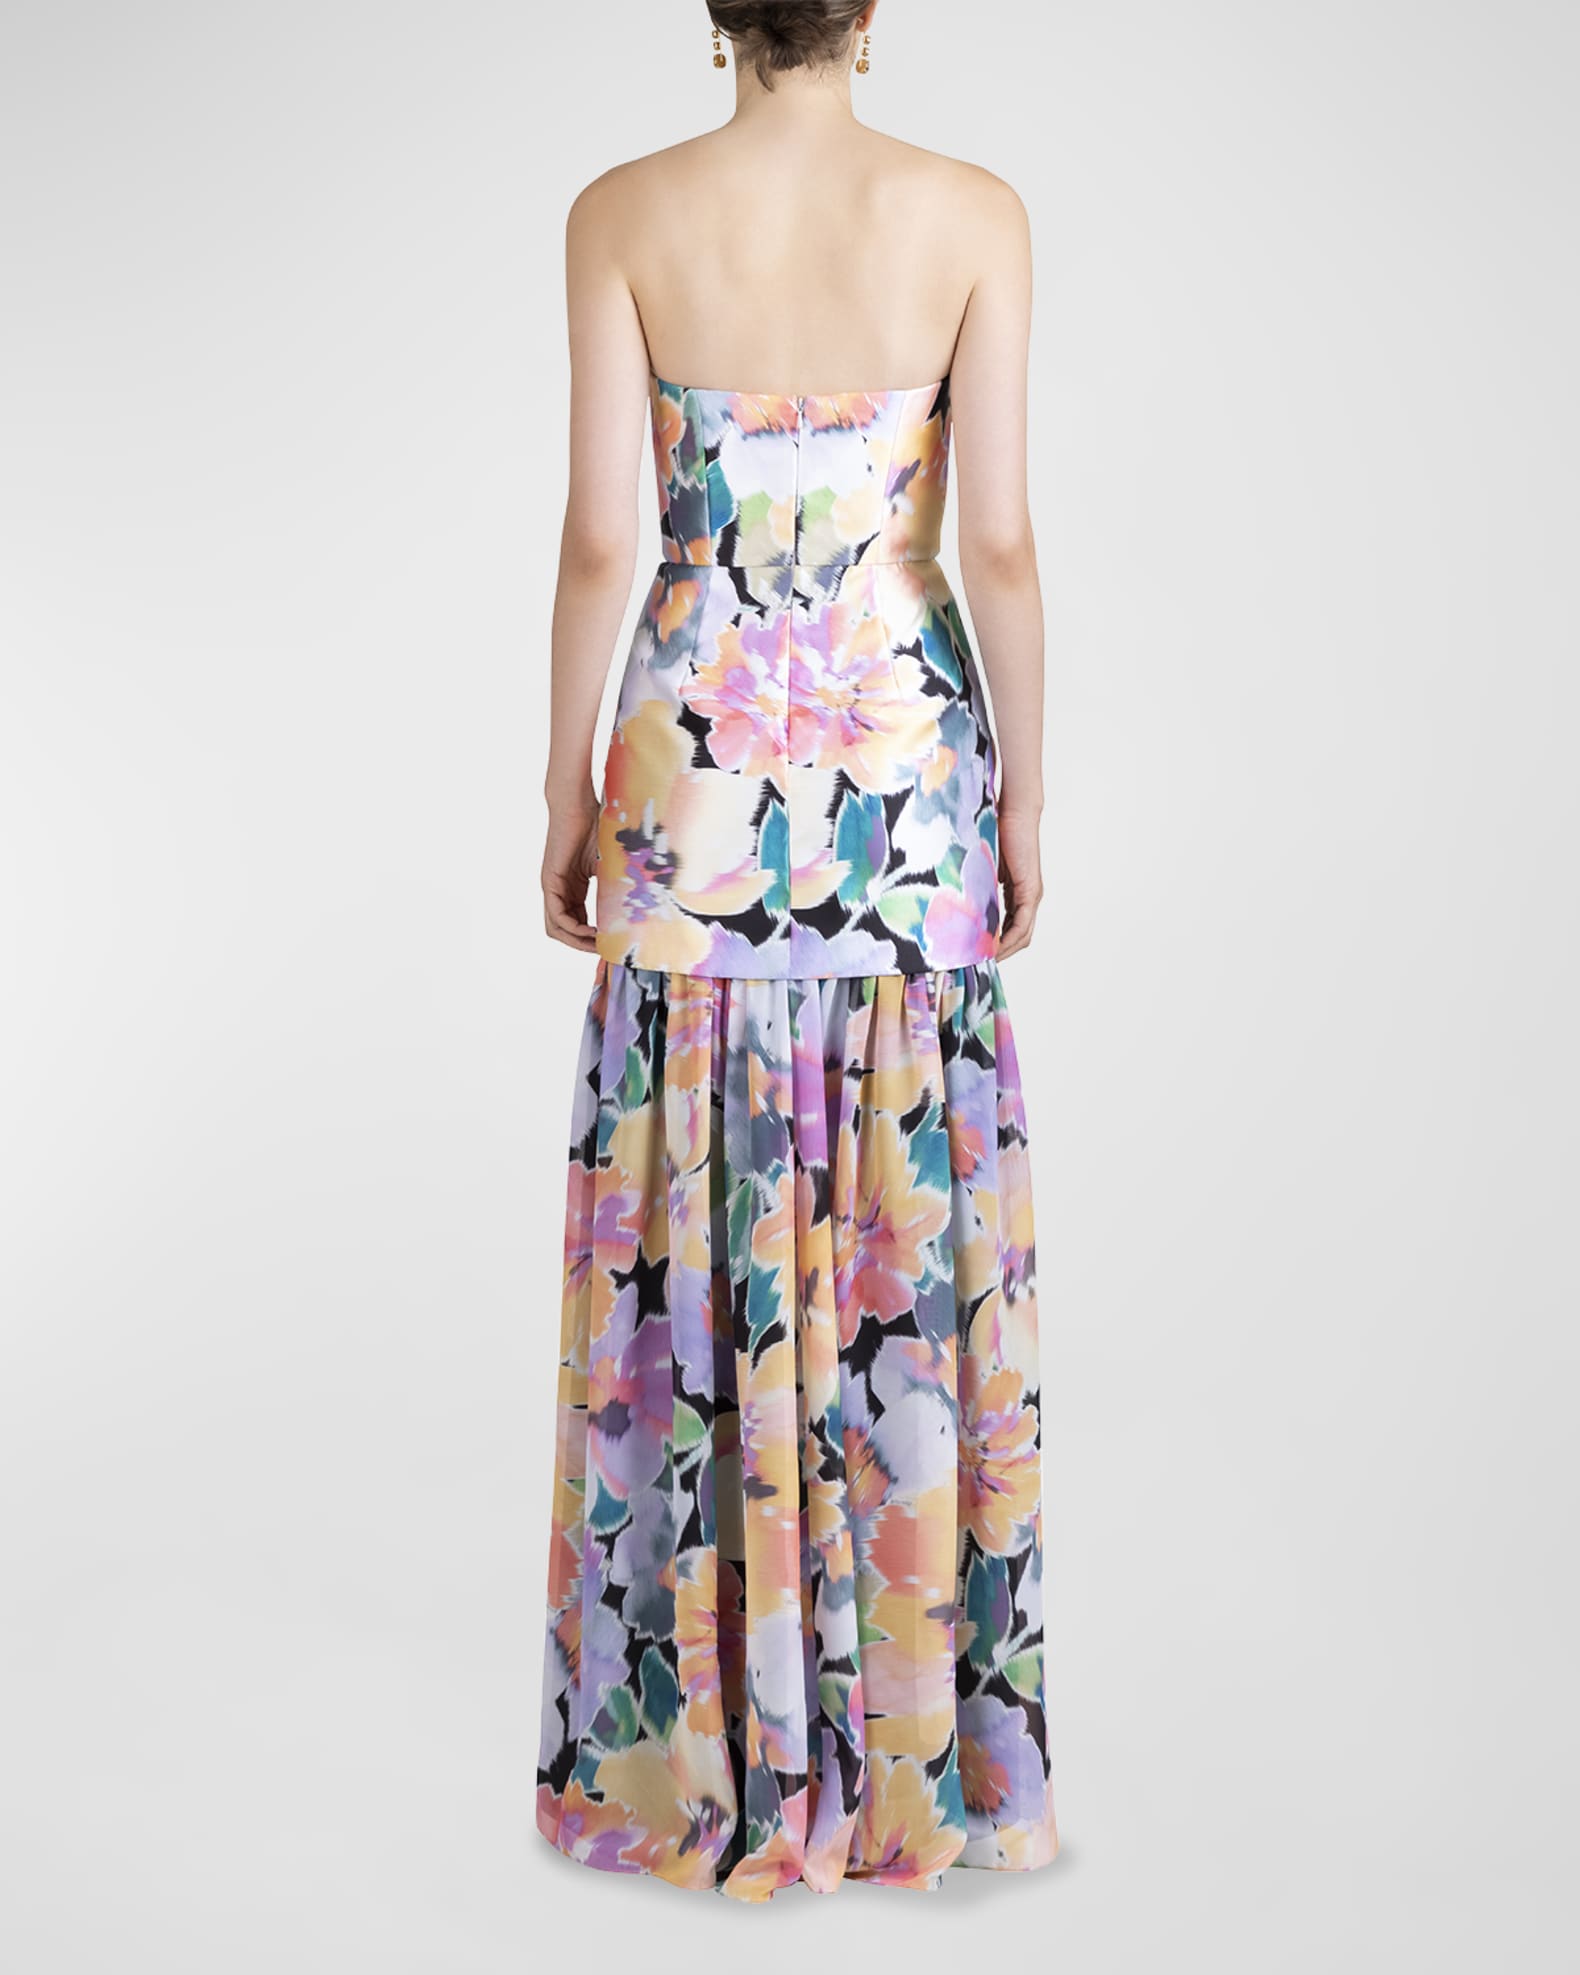 Shoshanna Strapless Floral-Print Sweetheart Gown | Neiman Marcus